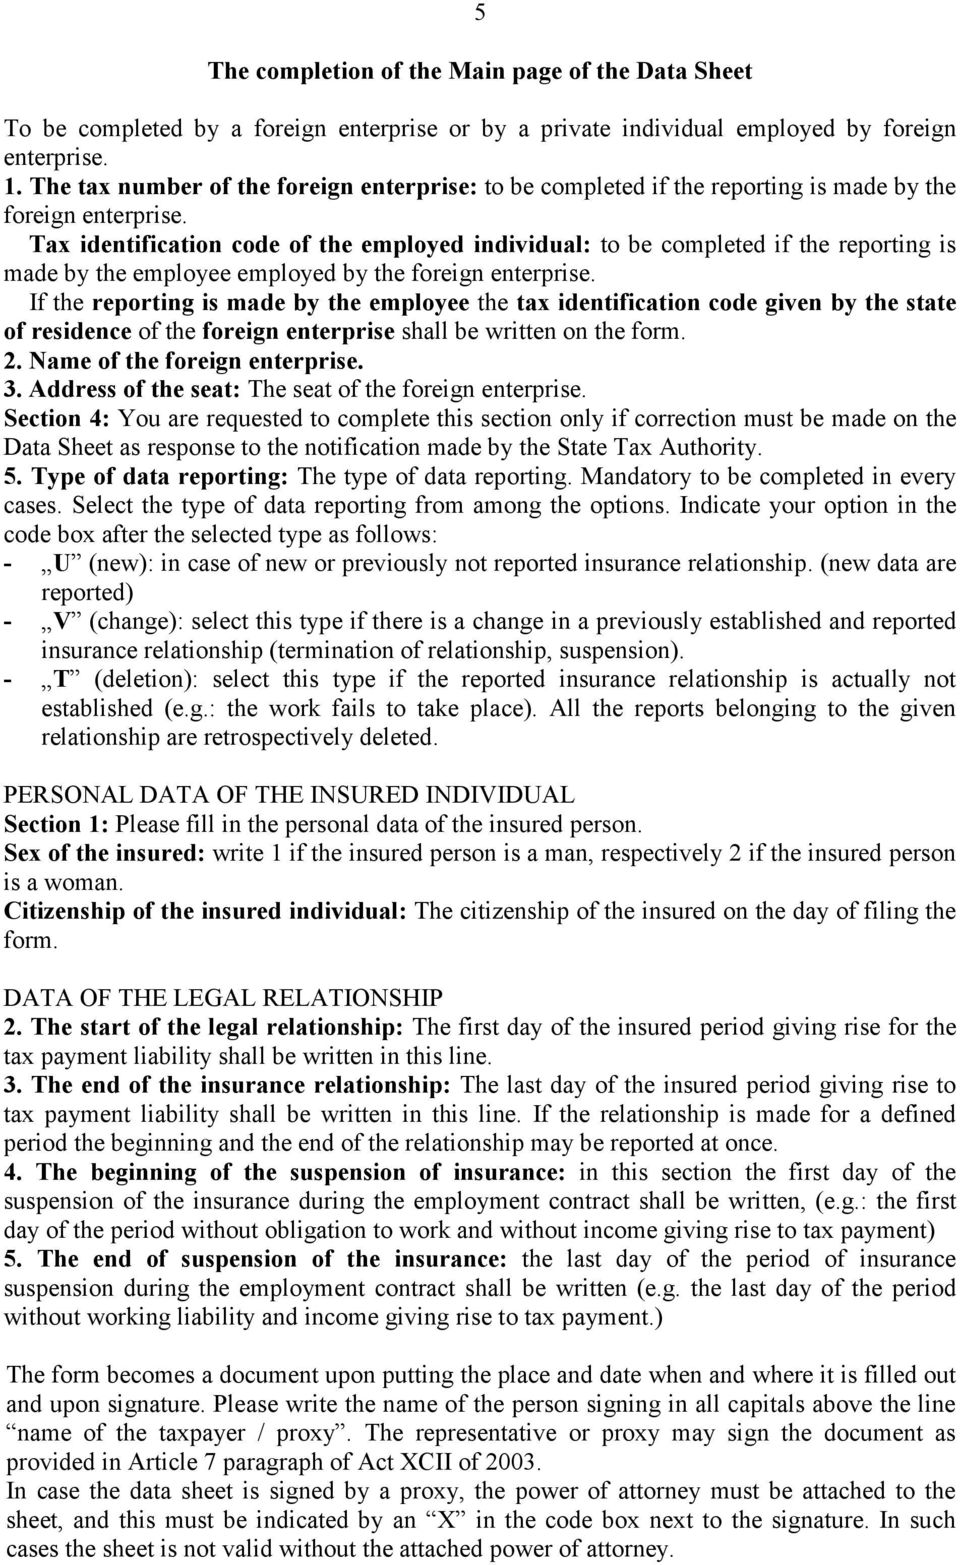 Tax identification code of the employed individual: to be completed if the reporting is made by the employee employed by the foreign enterprise.